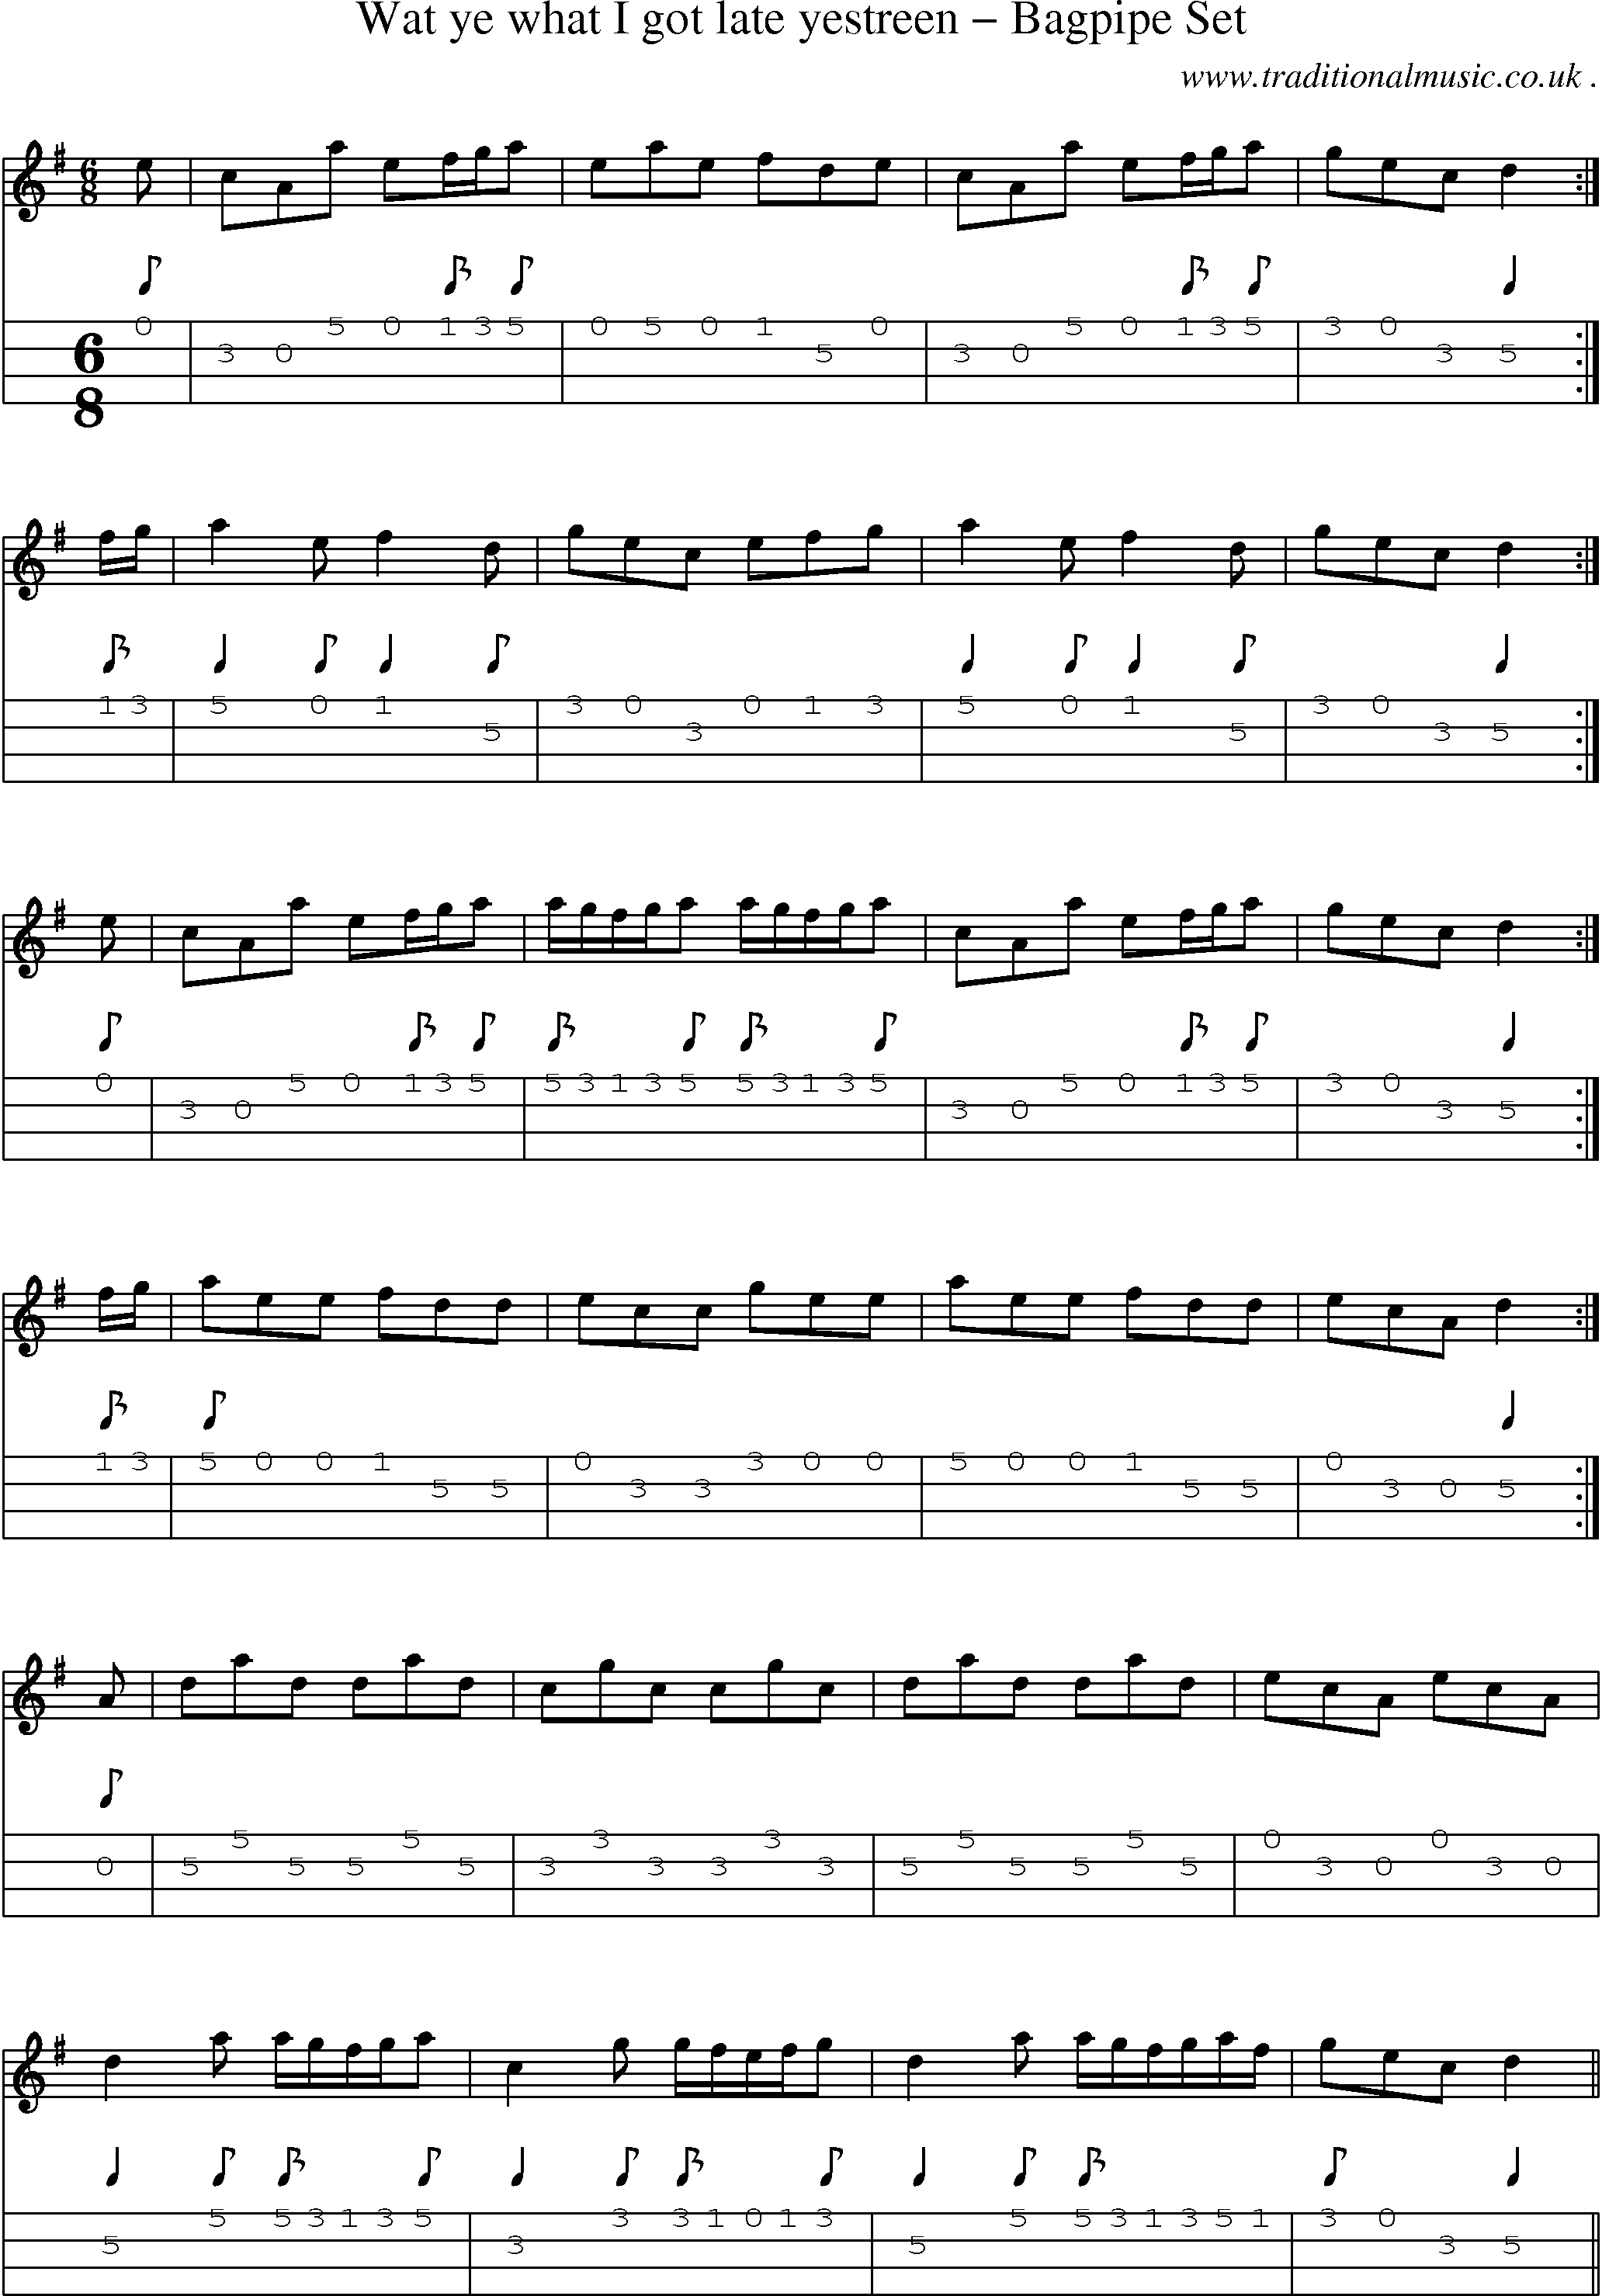 Sheet-Music and Mandolin Tabs for Wat Ye What I Got Late Yestreen Bagpipe Set